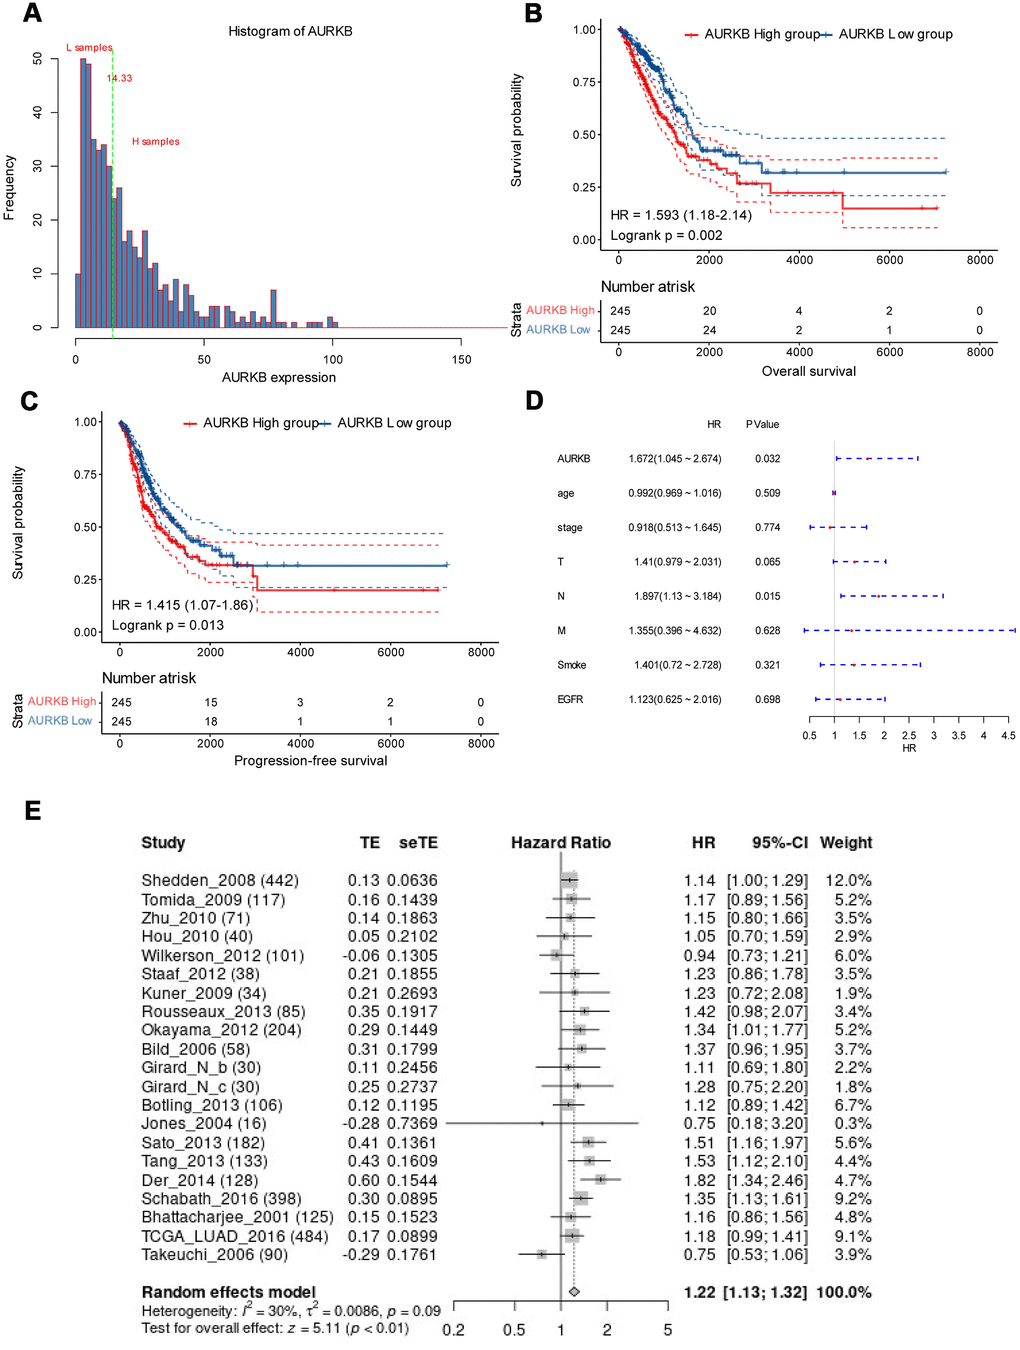 AURKB could independently predict the survival of lung adenocarcinoma. (A) AURKB expression distribution in all tumor samples; (B) High AURKB expression led to worse overall survival in the TCGA-LUAD cohort (HR[95%CI]: 1.593[1.18-2.14], p = 0.002). (C) High AURKB expression correlated with poor progression-free survival in the TCGA-LUAD cohort (HR[95%CI]: 1.415[1.07-1.86], p = 0.013). (D) Multivariate analysis showed AURKB and N stage were independent prognosis factor in the TCGA-LUAD cohort (HR[95%CI]: 1.672[1.045-2.674], 1.897[1.13-3.184], respectively). (E) Meta-analysis of AURKB expression in the prediction of overall survival of lung adenocarcinoma patients from different datasets by Lung Cancer Explorer (LCE).